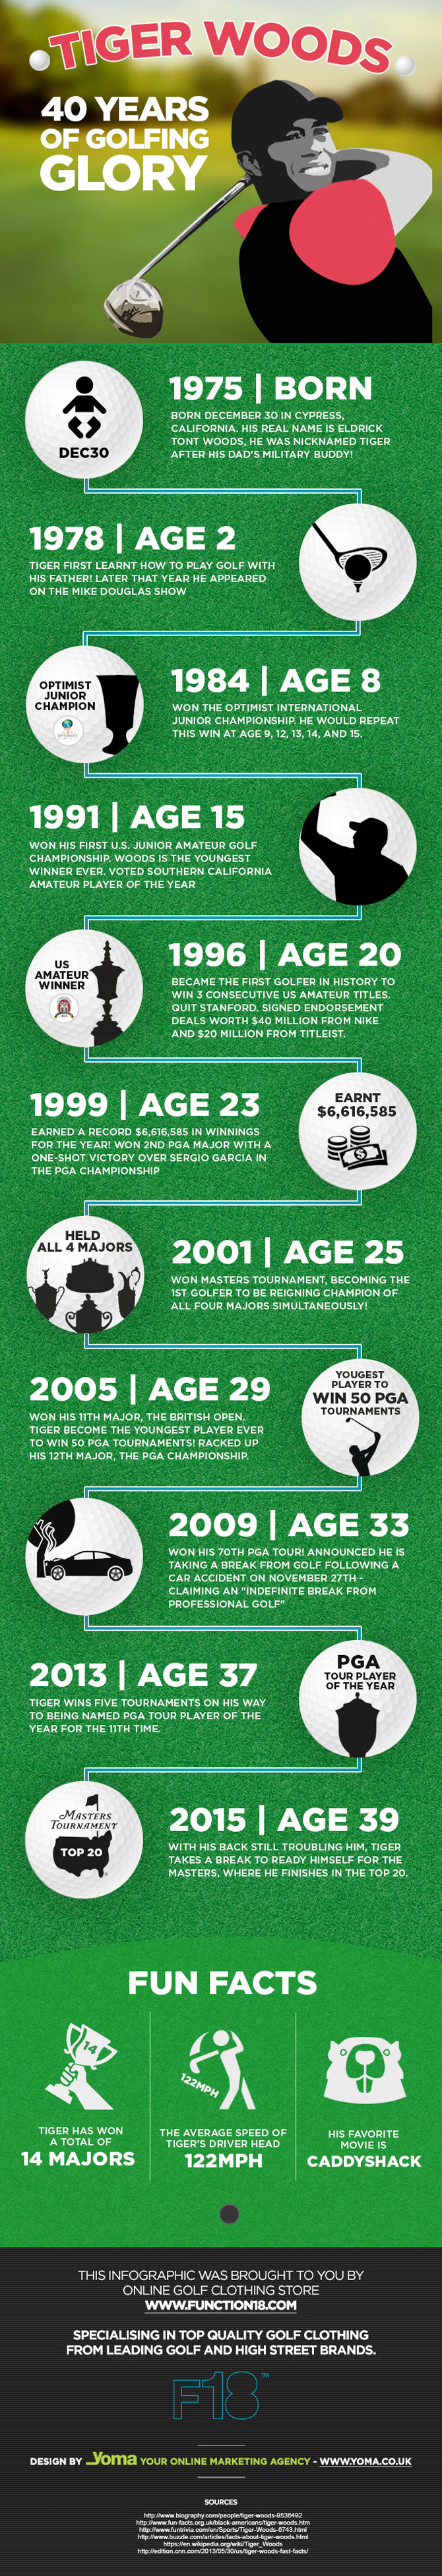 Tiger Woods: 40 Years of Golfing Glory by Function 18